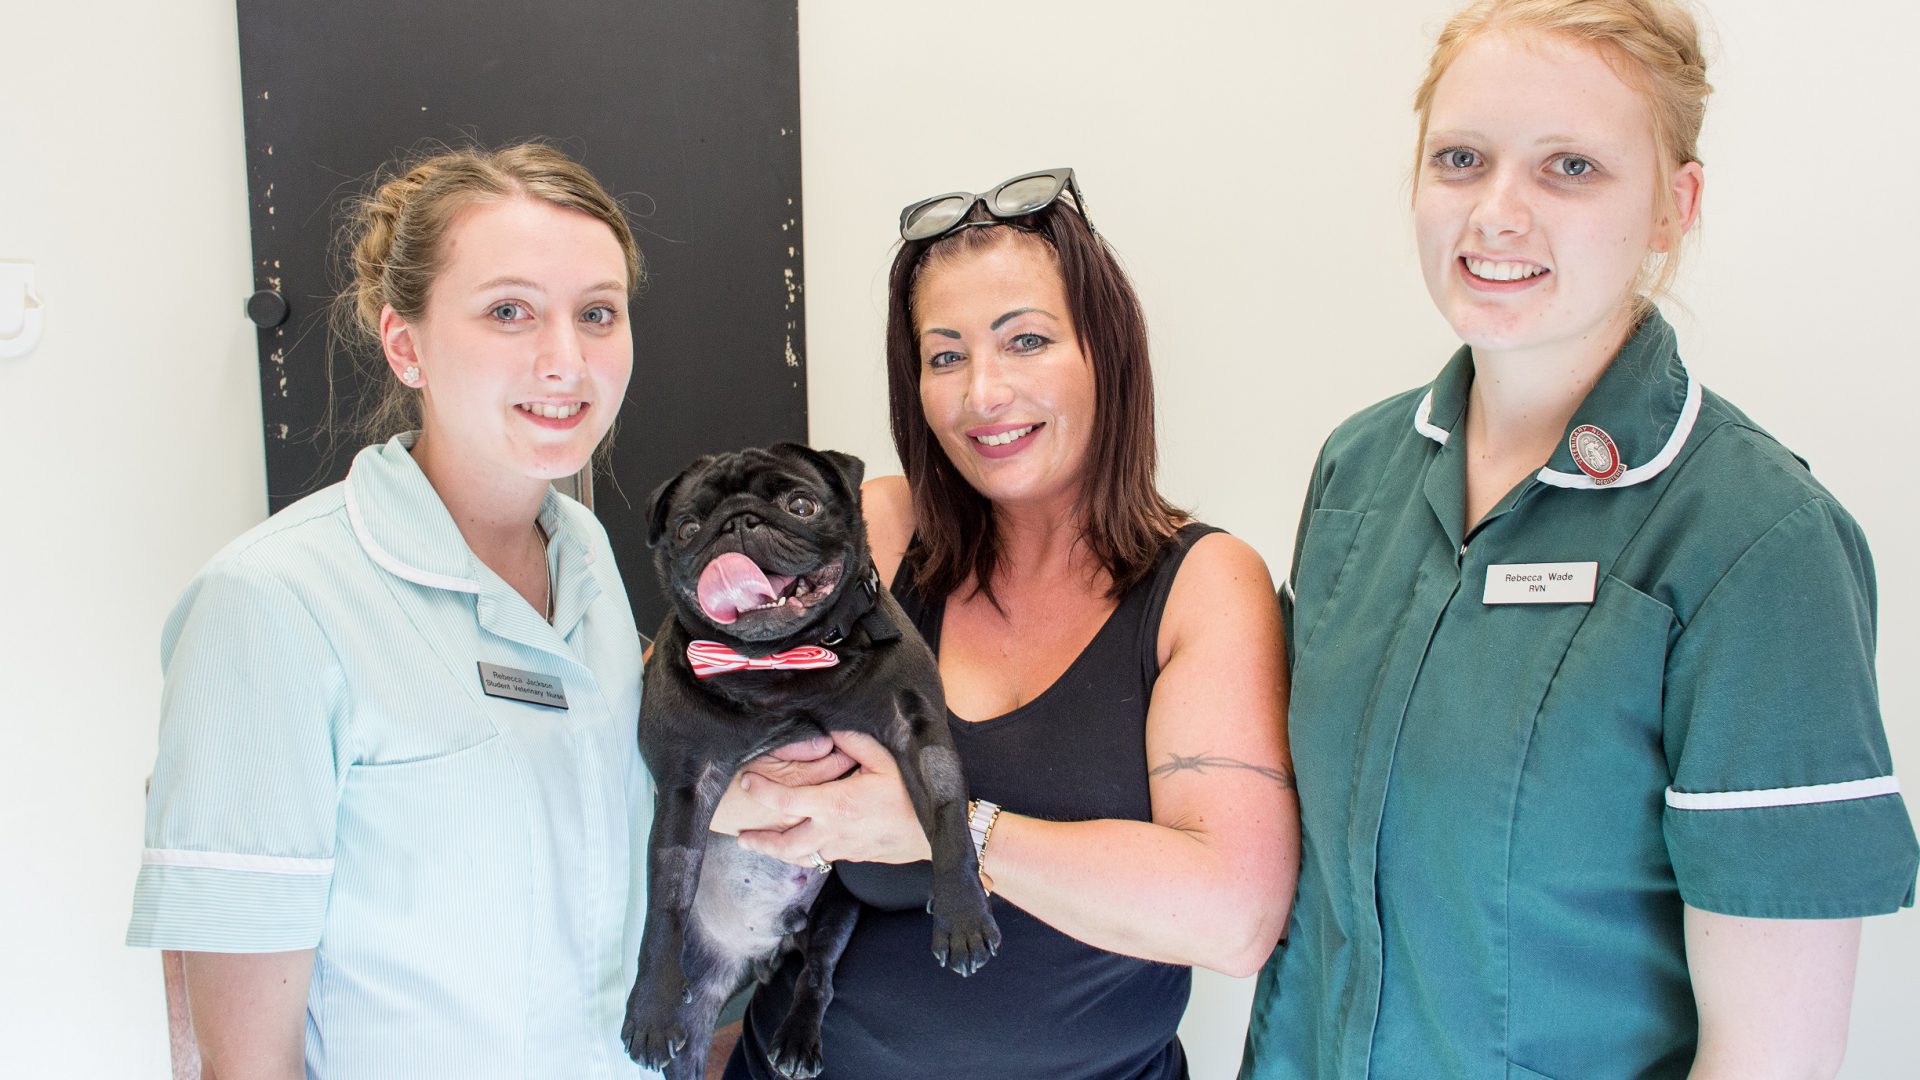 Doug the Pug saved by vets after swallowing cement powder